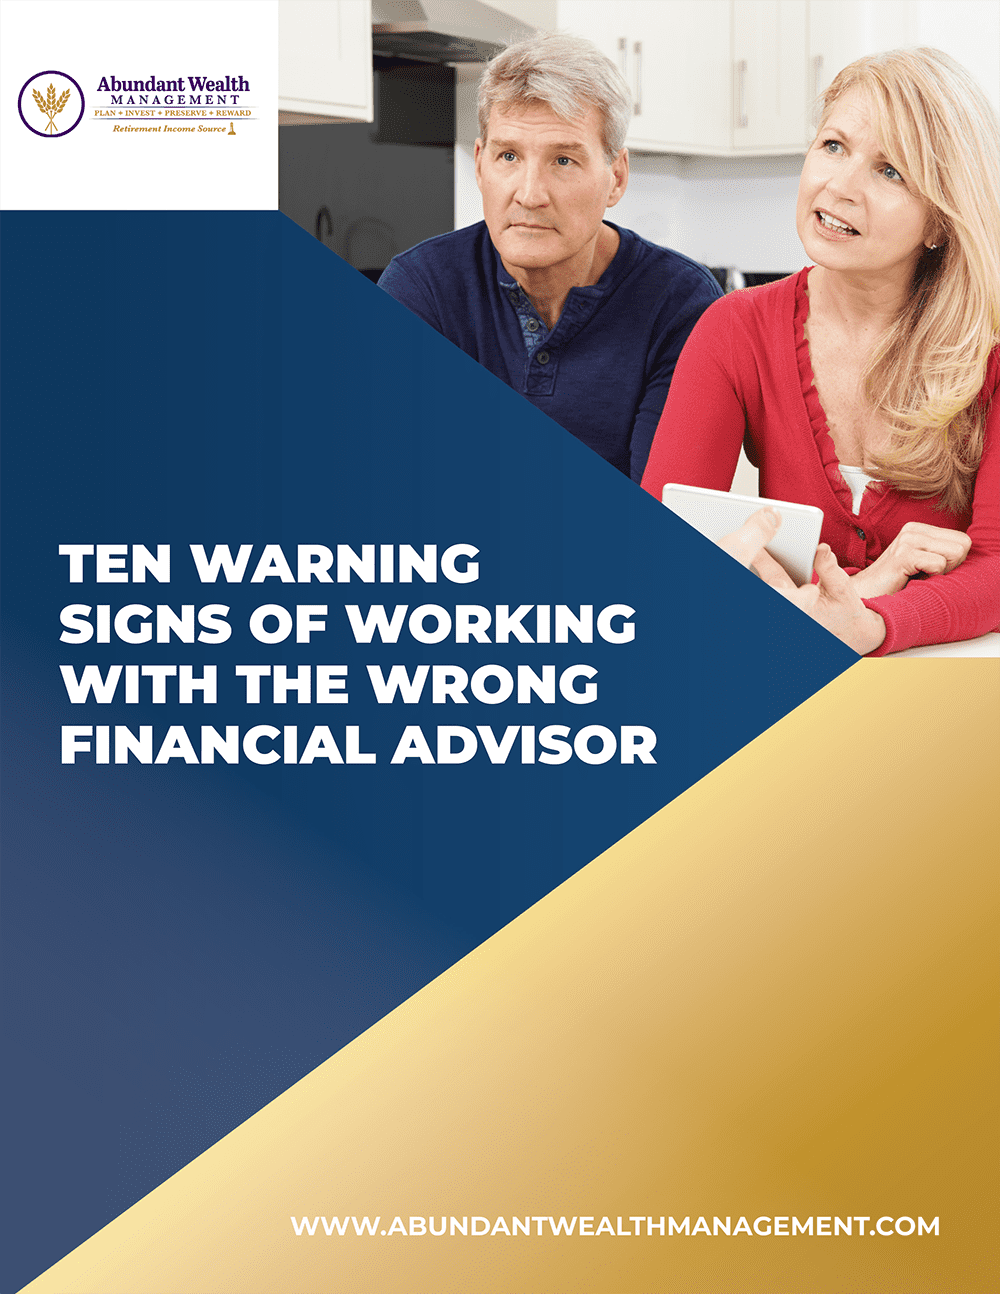 Abundant Wealth Management - Ten Warning Signs of Working with the Wrong Financial Advisor-1